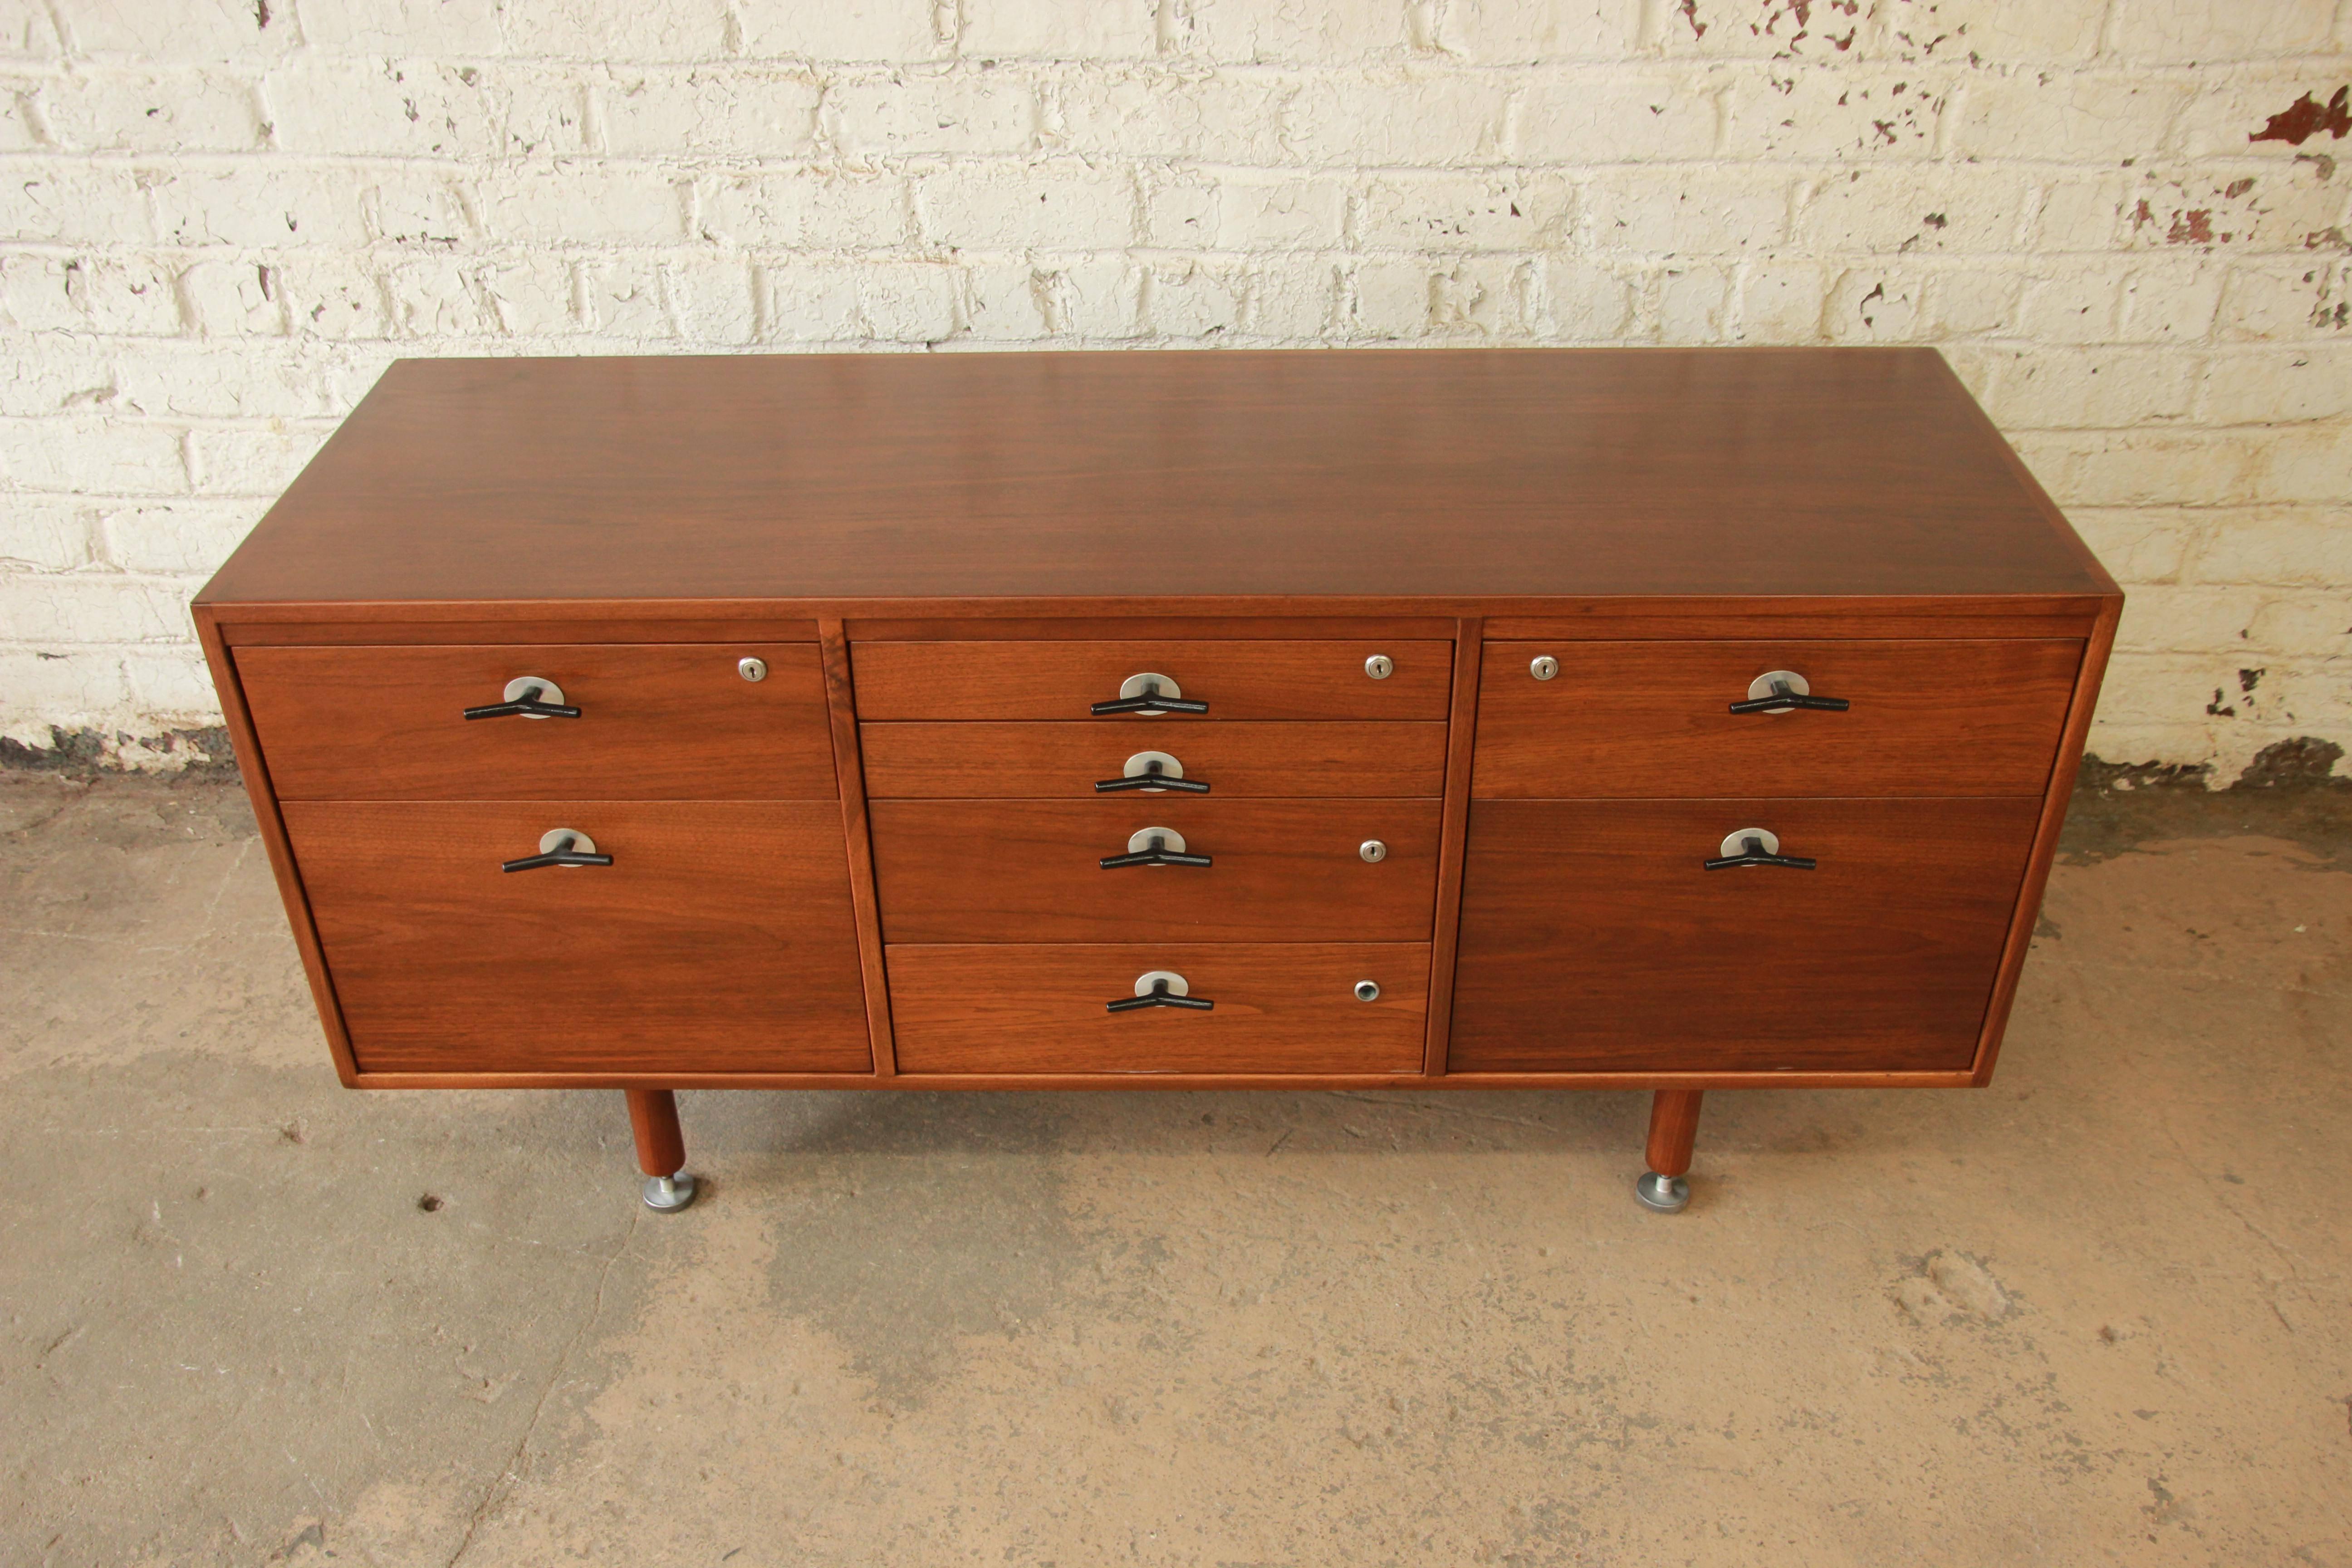 Mid-Century Modern walnut credenza by iconic designer Jens Risom. The credenza has been professionally refinished and has stunning walnut wood grain. It features Risom's unique and rare aluminium 